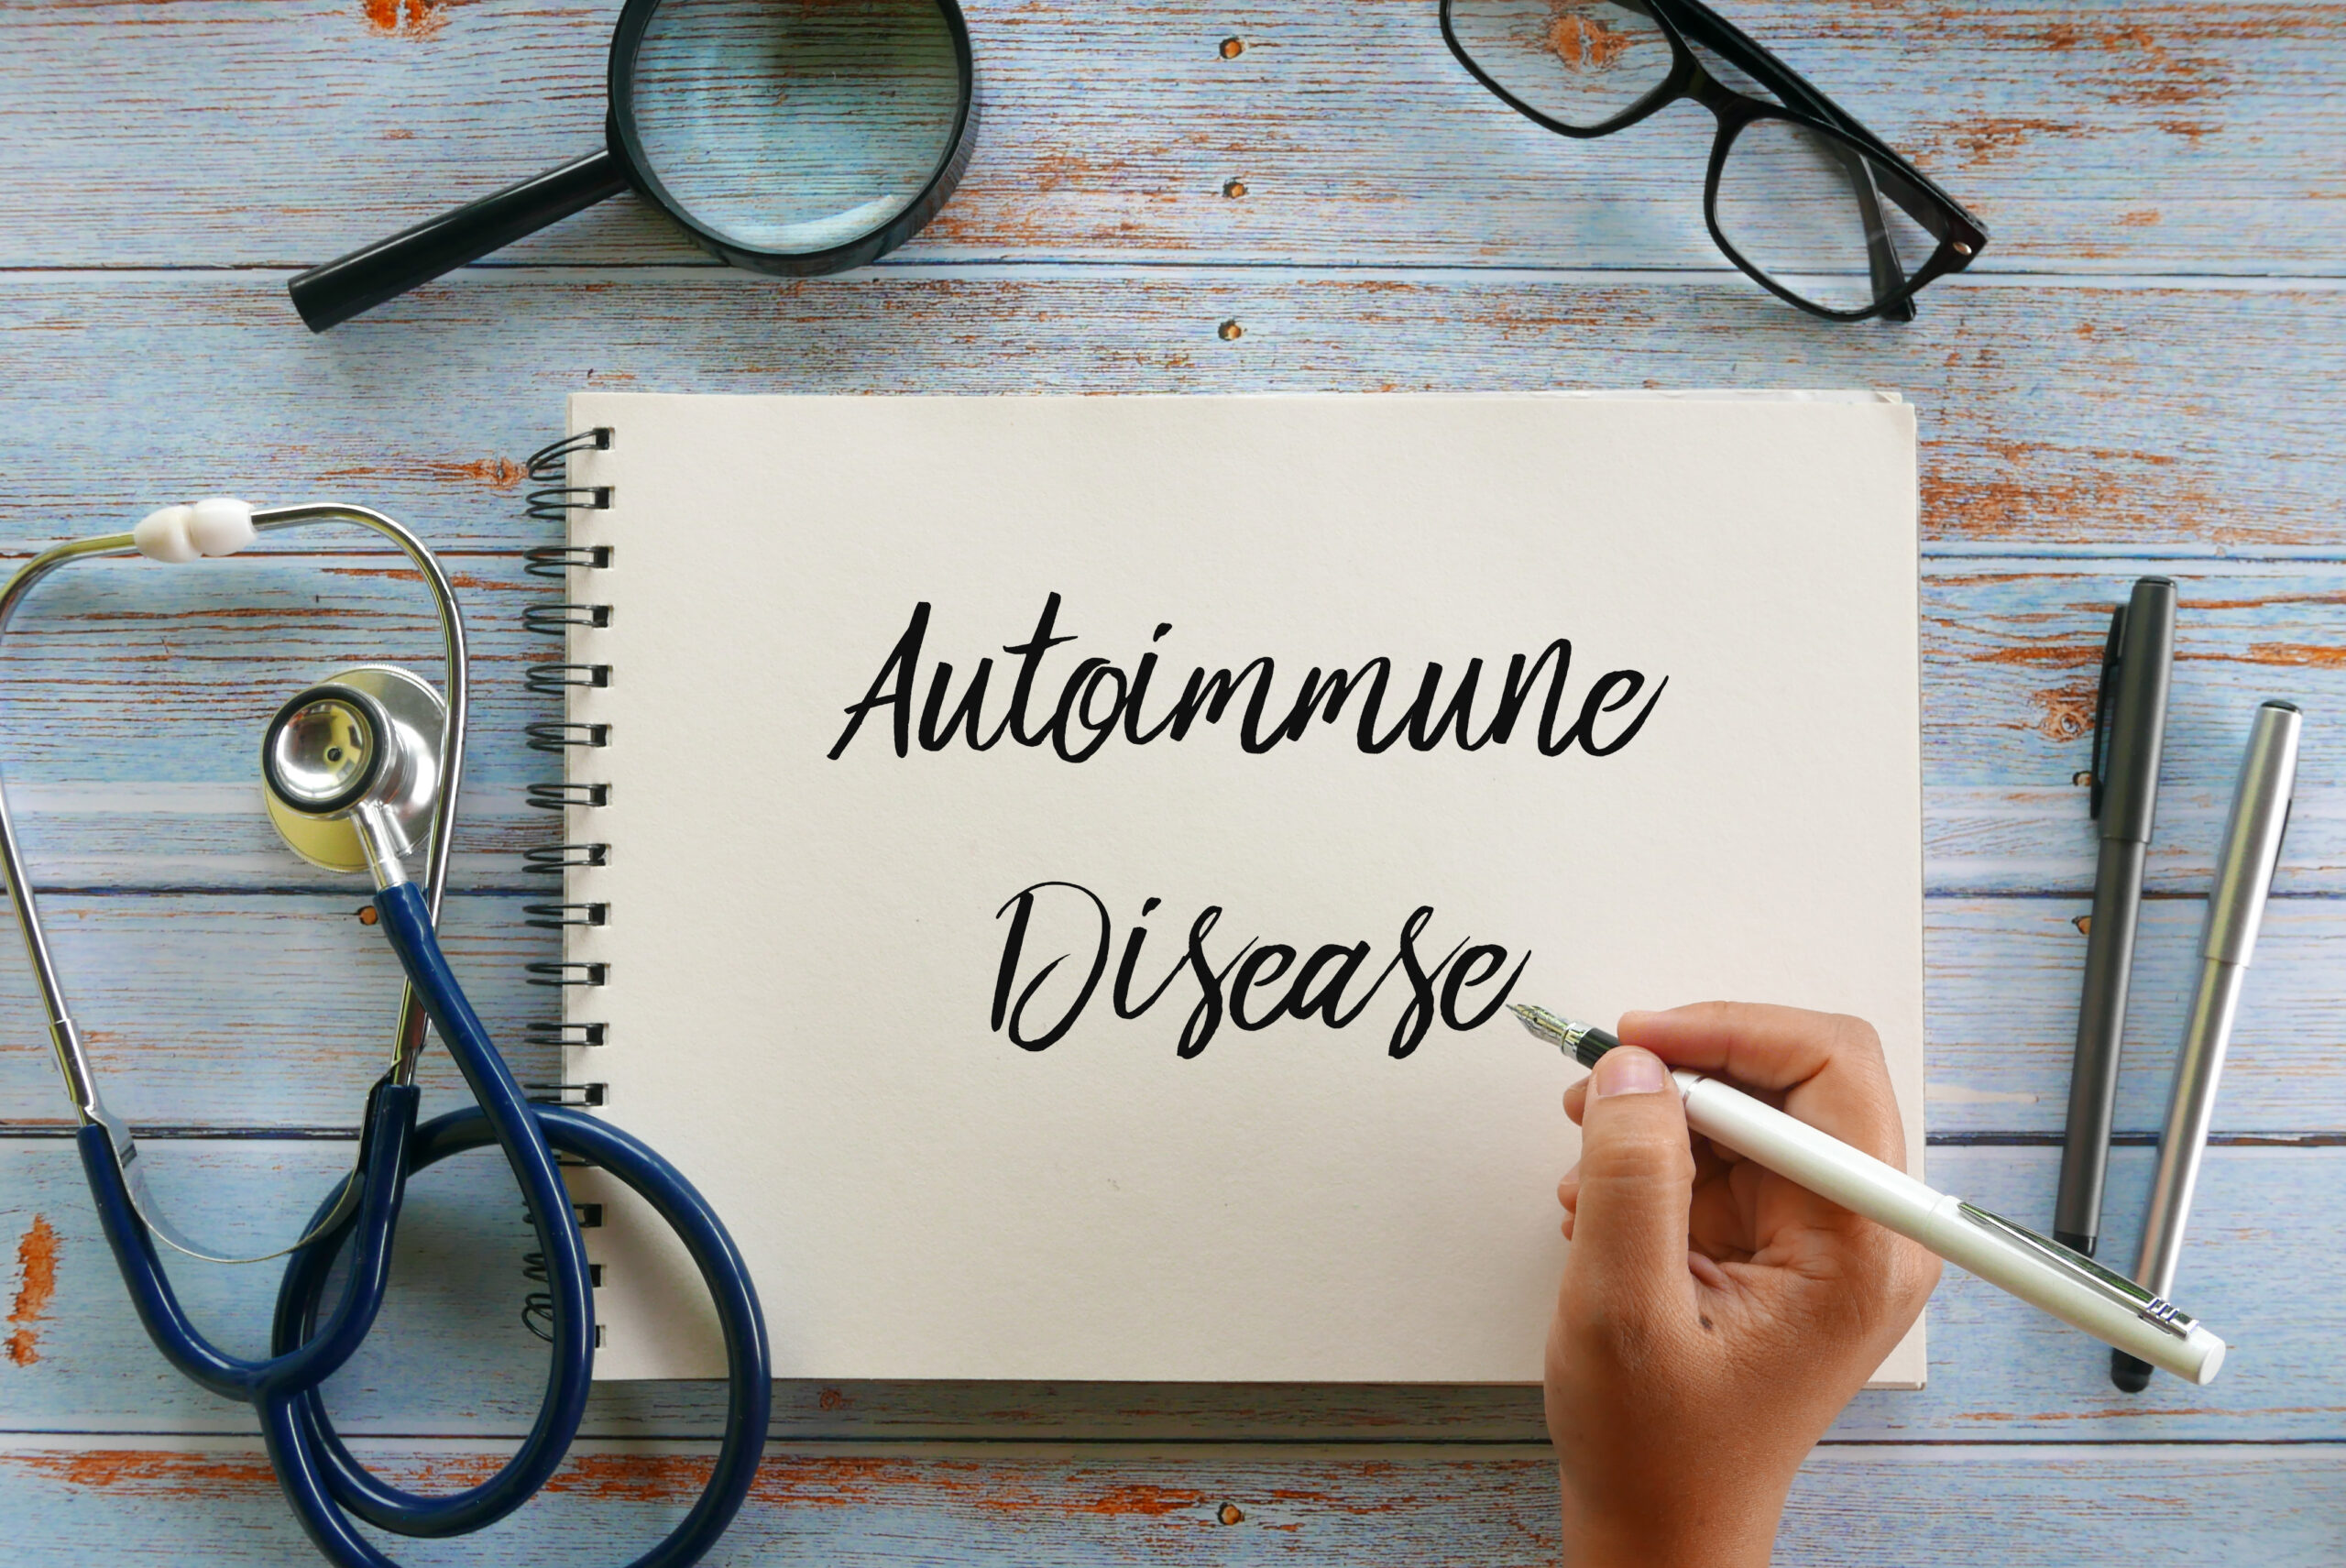 Autoimmune Disease: What Is, Types, Causes, Symptoms, and Treatment